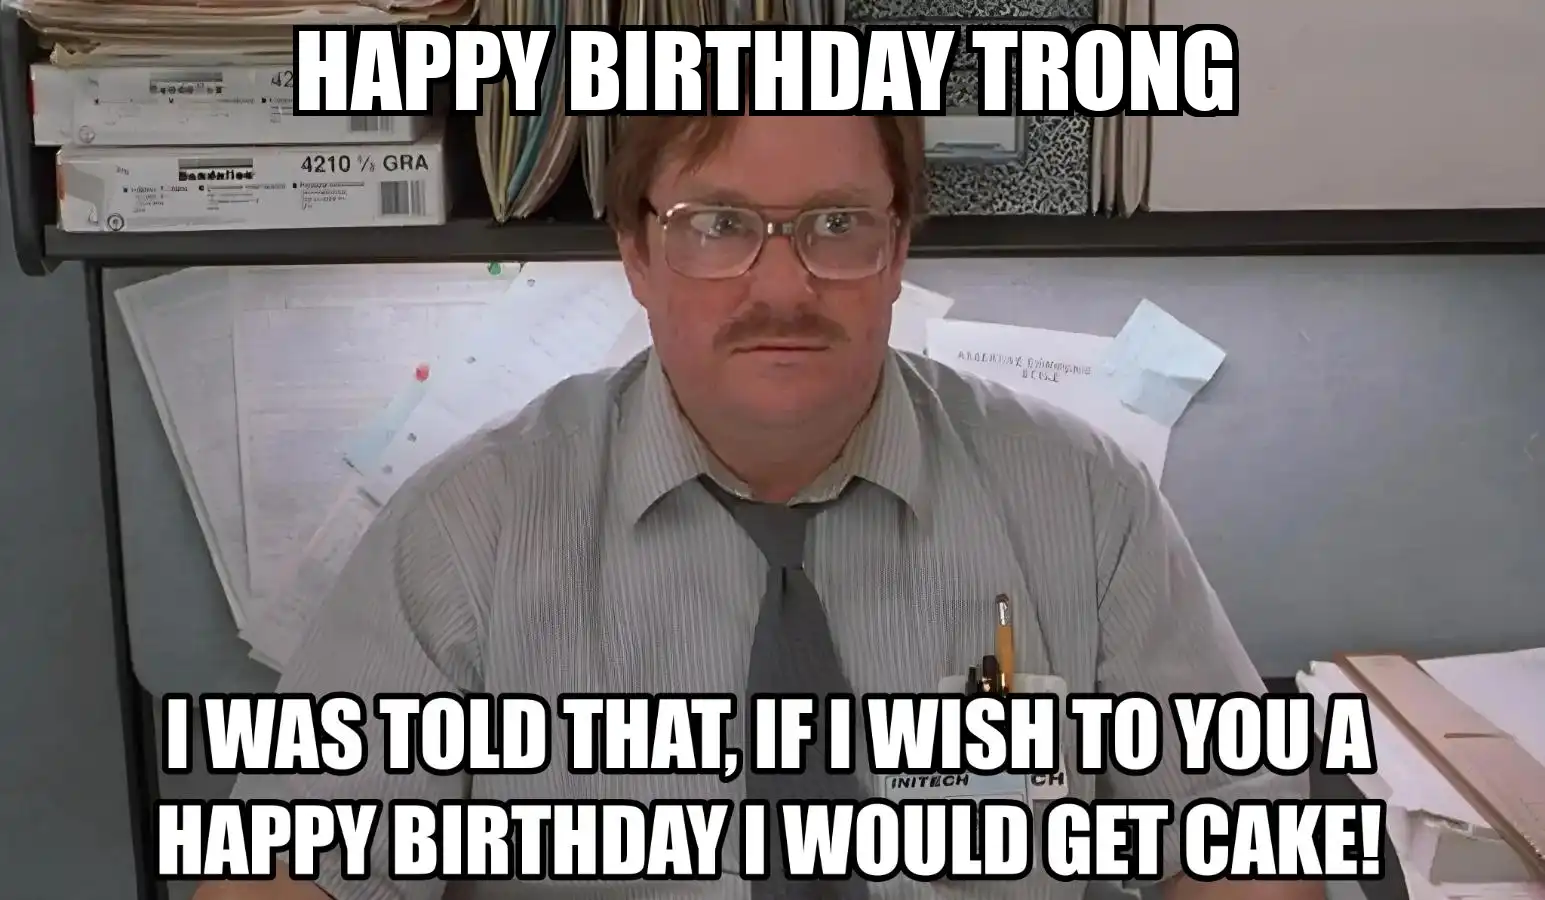 Happy Birthday Trong I Would Get A Cake Meme